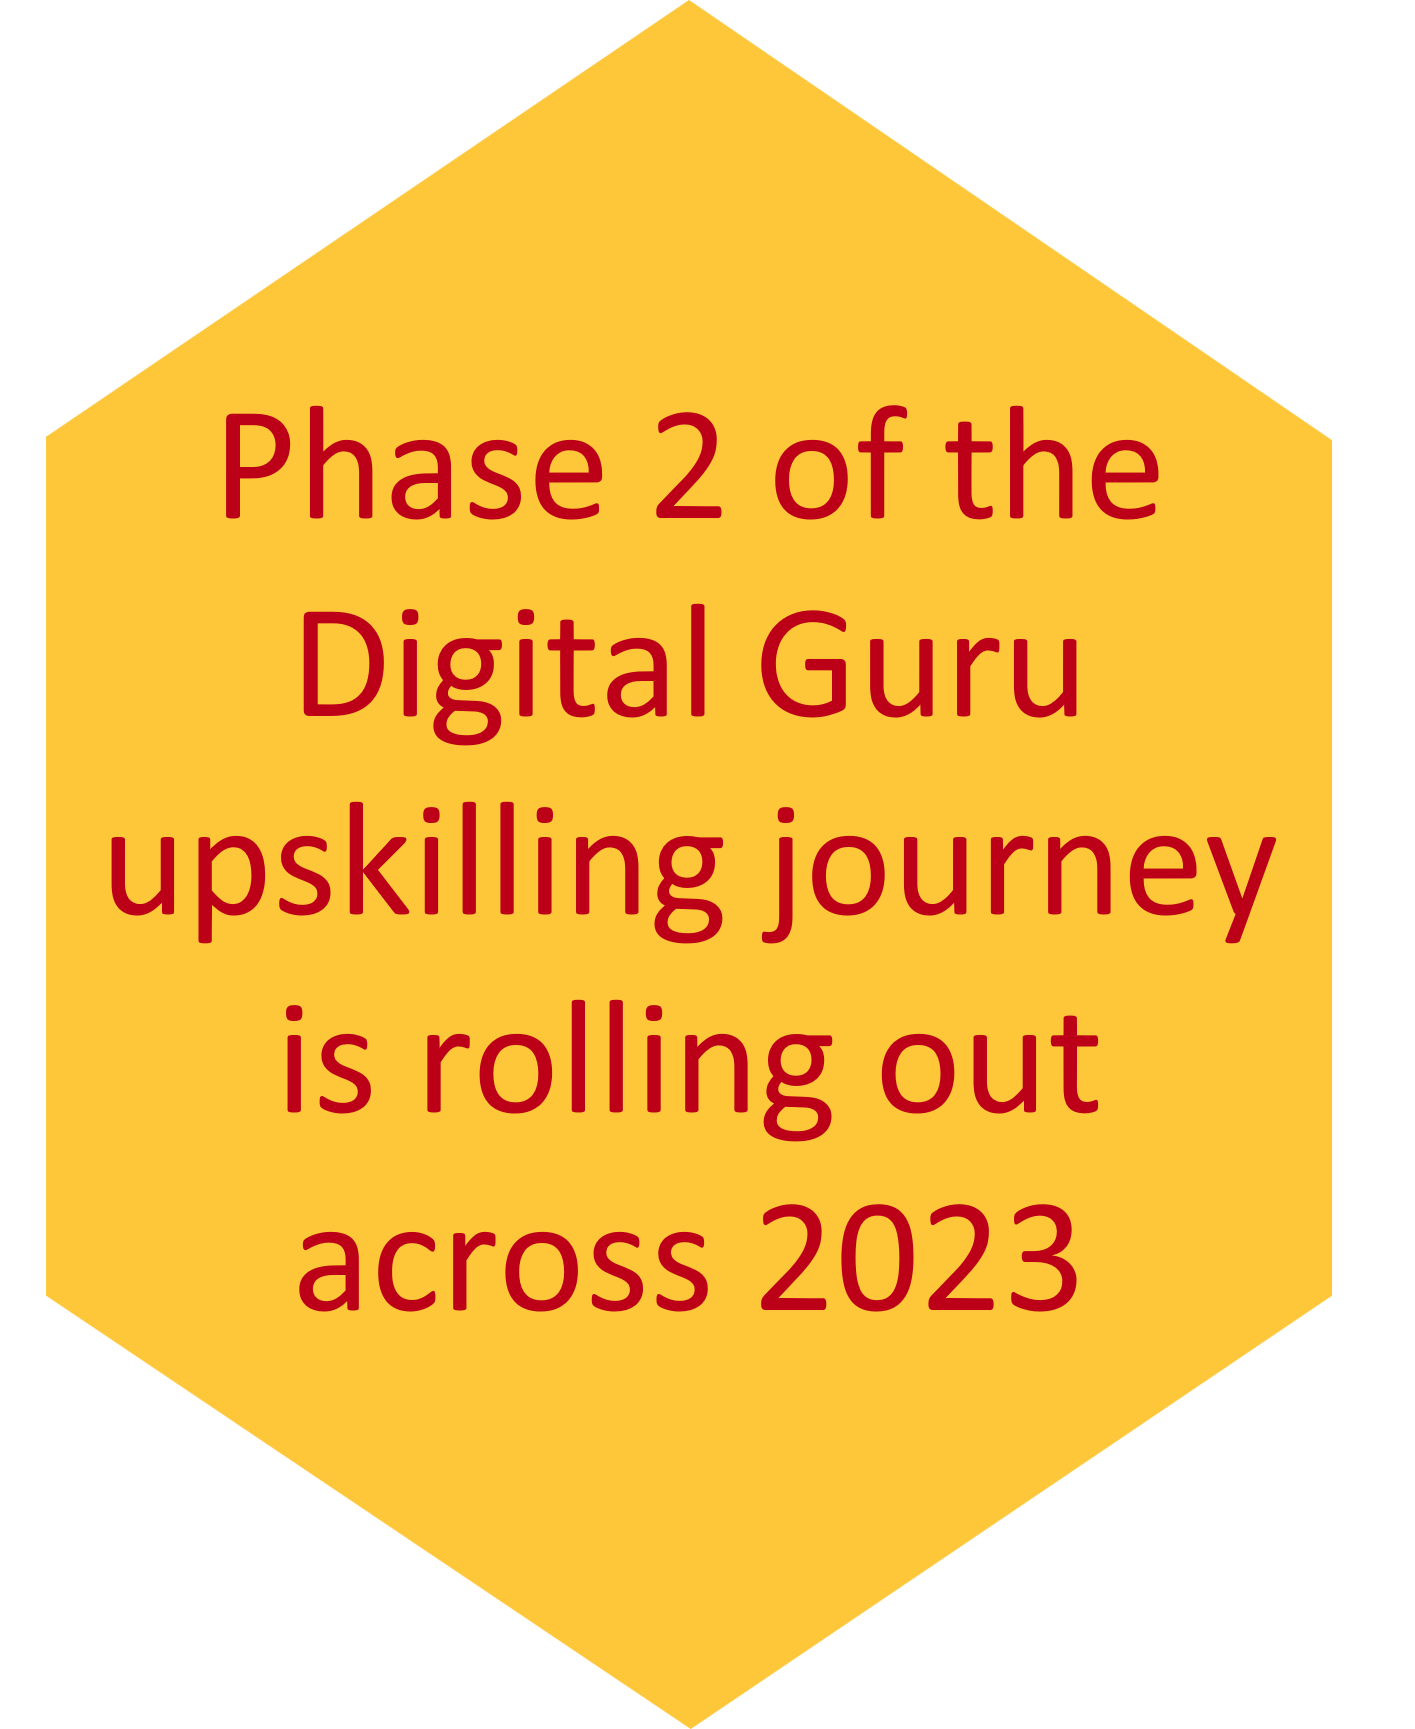 A yellow hexagon with red text inside it saying ' Phase 2 of the Digital Guru upskilling journey is rolling out across 2023'